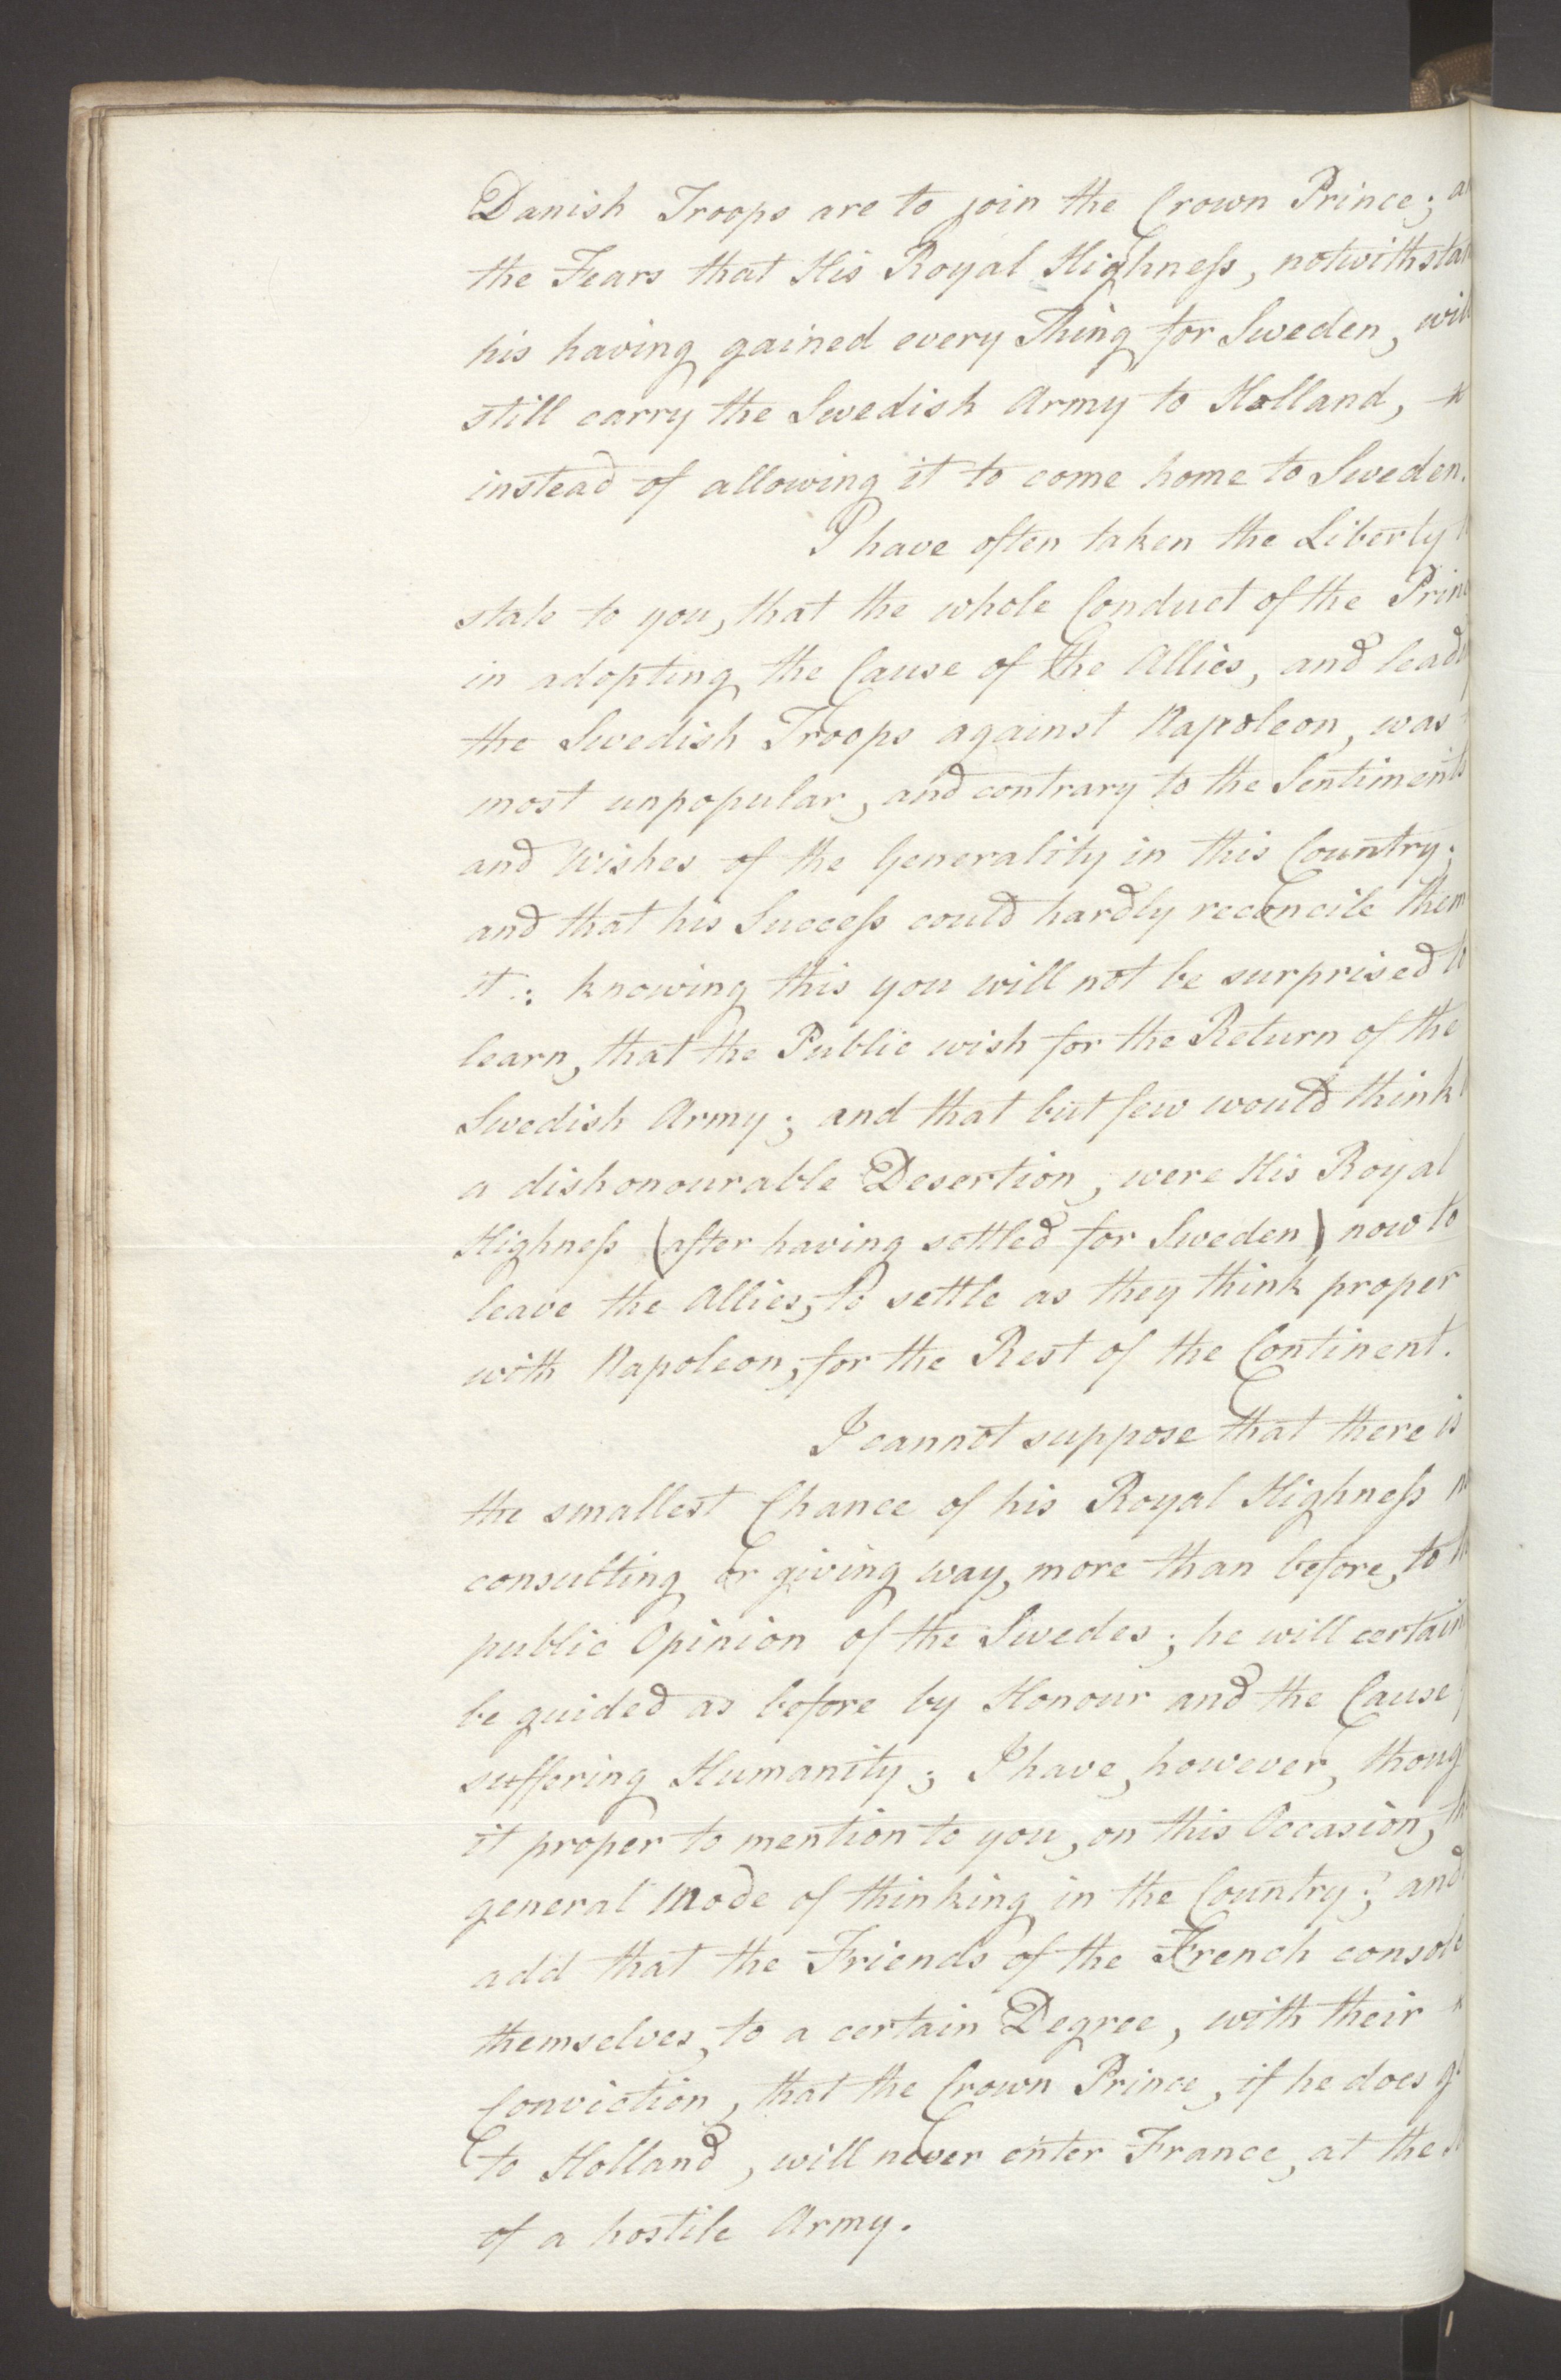 Foreign Office*, UKA/-/FO 38/16: Sir C. Gordon. Reports from Malmö, Jonkoping, and Helsingborg, 1814, s. 15